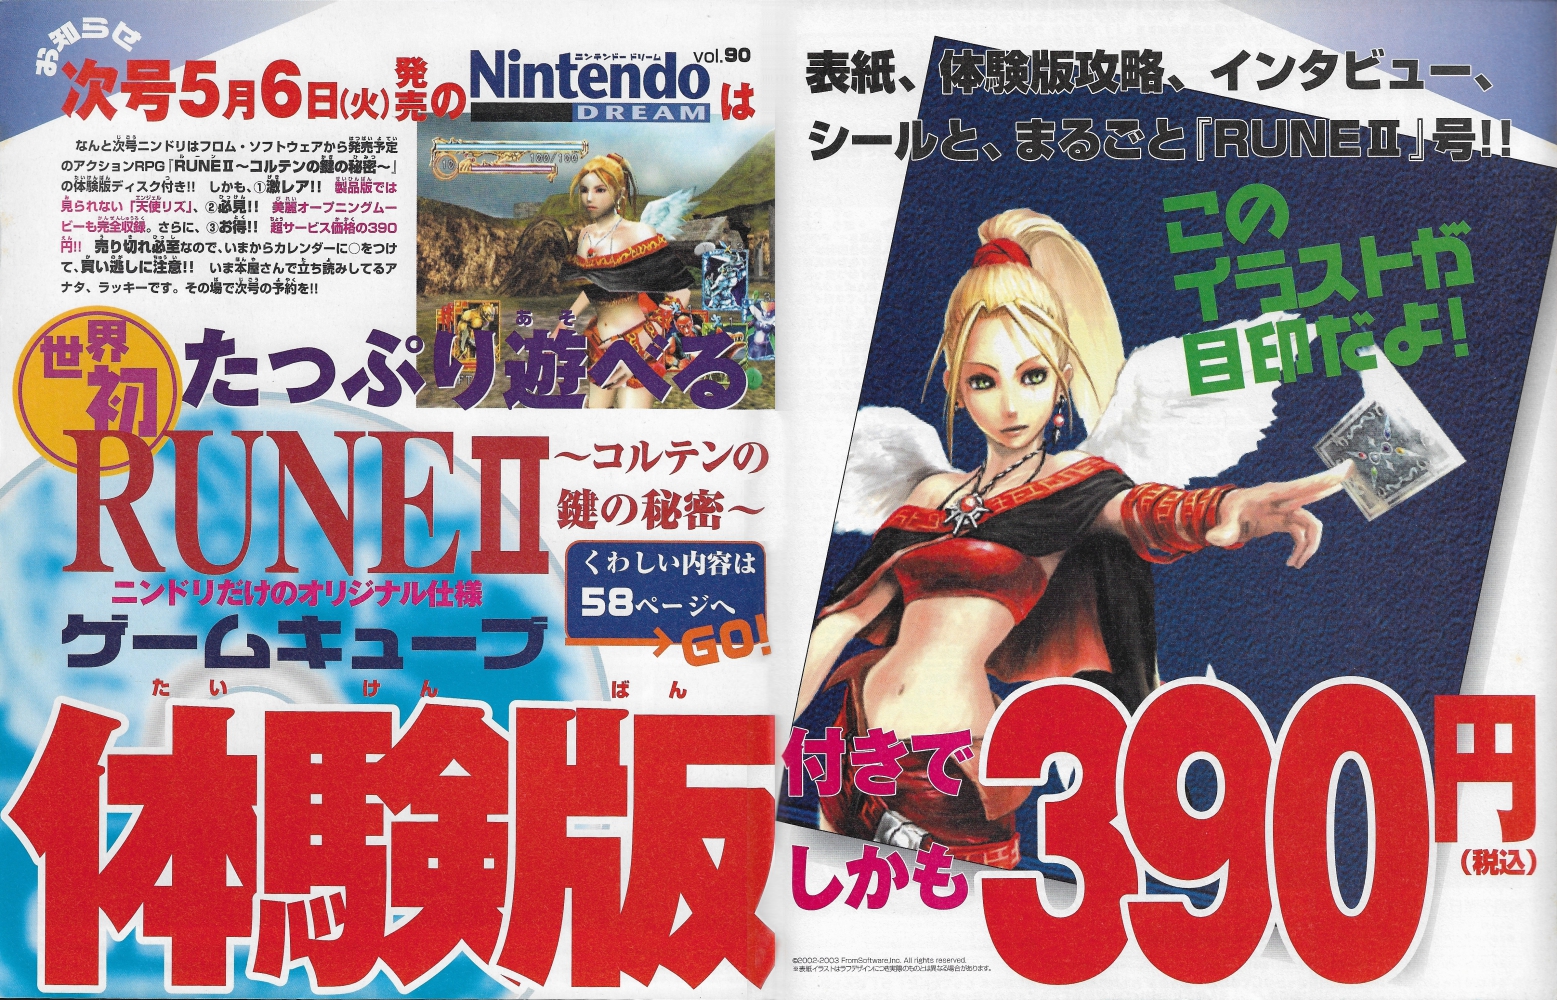 two page spread scan of a lost kingdoms 2 preview entirely in japanese, with large headlines in different colours and fonts. there is a blurb in japanese in the top left, beside it a screenshot of the demo disk. the screenshot features tara's demo outfit of a high long ponytail, tube top and capelet and angel wings with red accents on the whole outfit. on the right page is an illustration of demo outfit tara wielding a card, taking up most of the page.